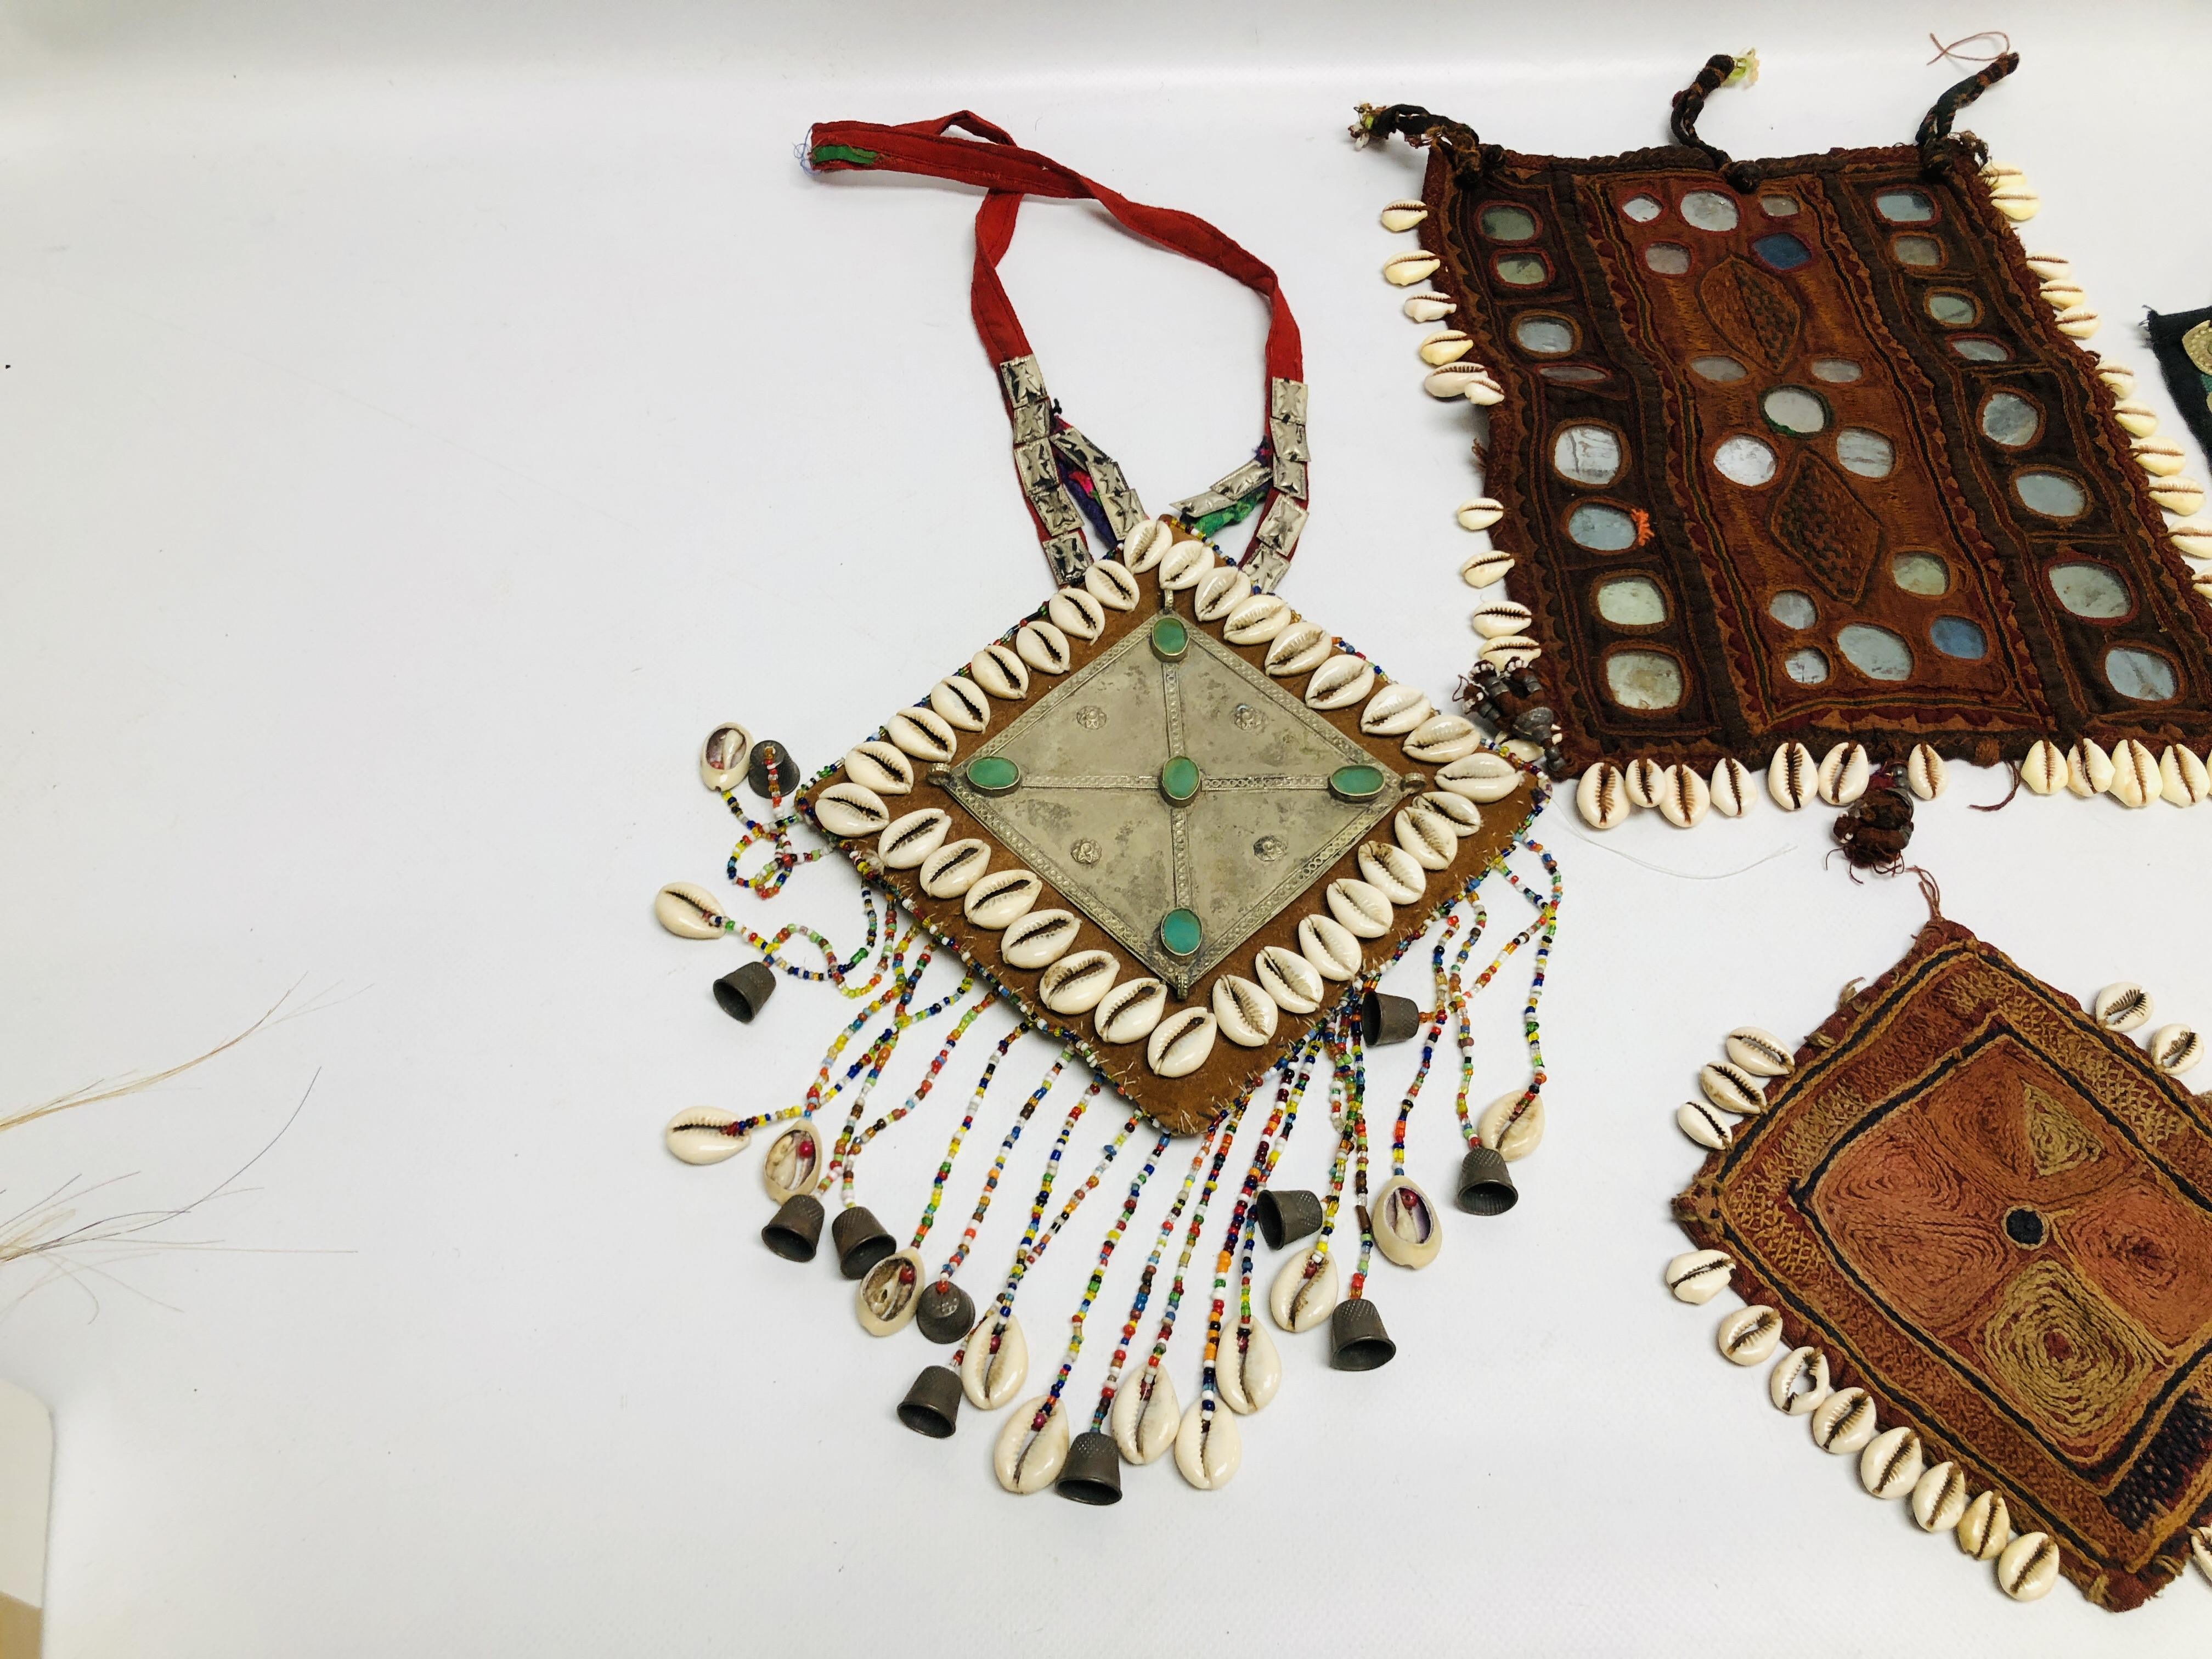 A GROUP OF FIVE VARIOUS AFGHAN TEXTILE PIECES APPLIED WITH COWRIE SHELLS AND OTHER DECORATION - Image 3 of 10